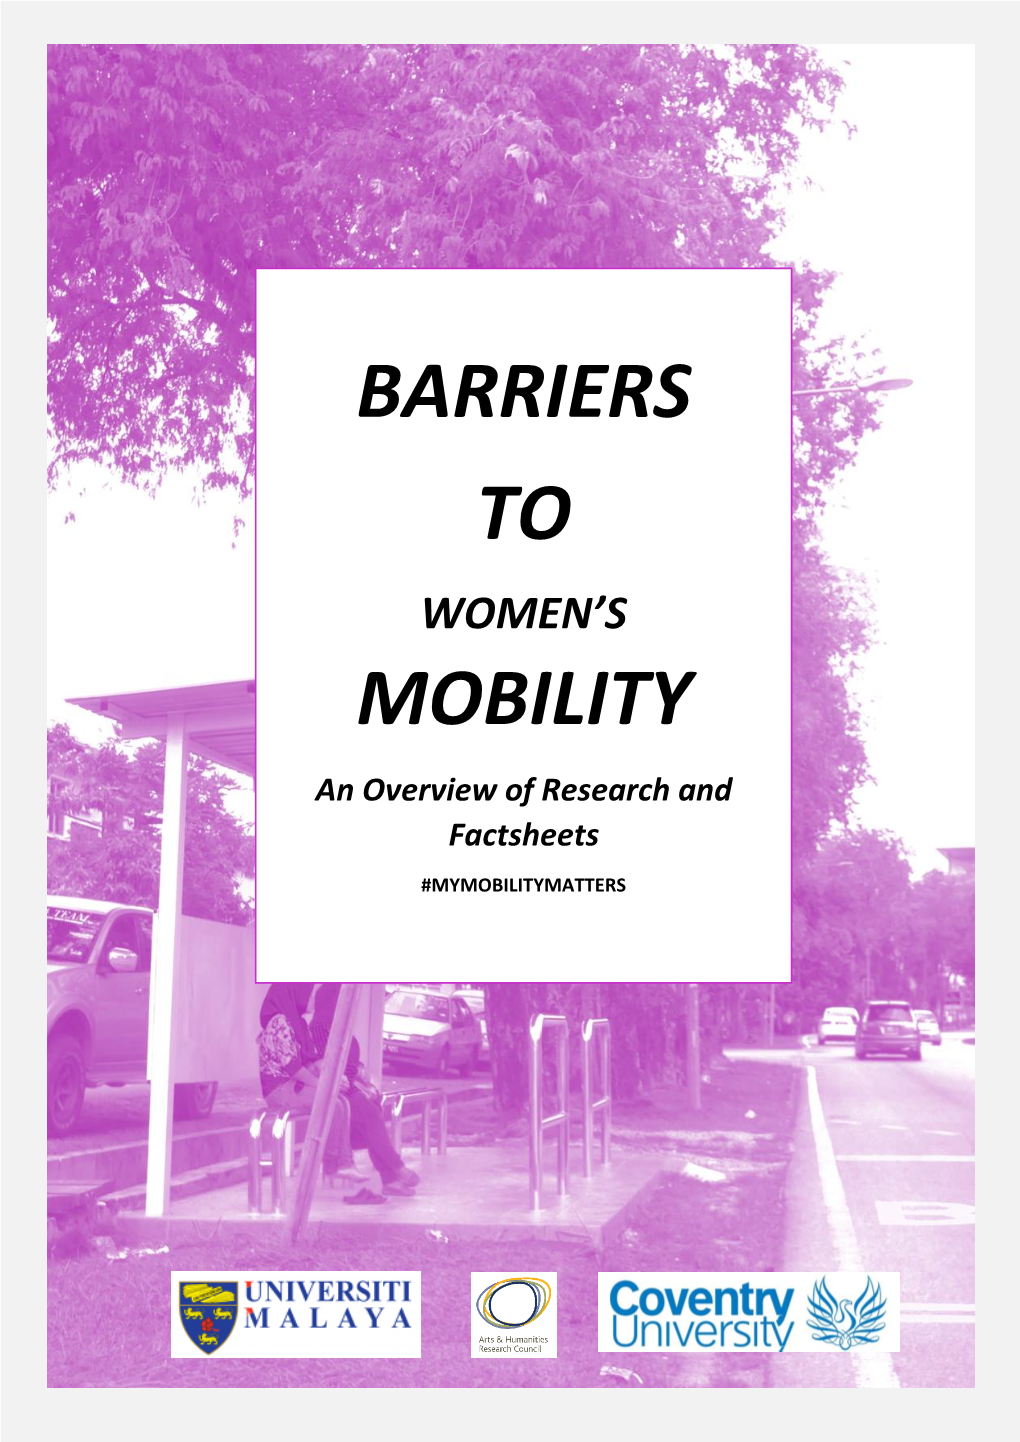 Barriers to Mobility